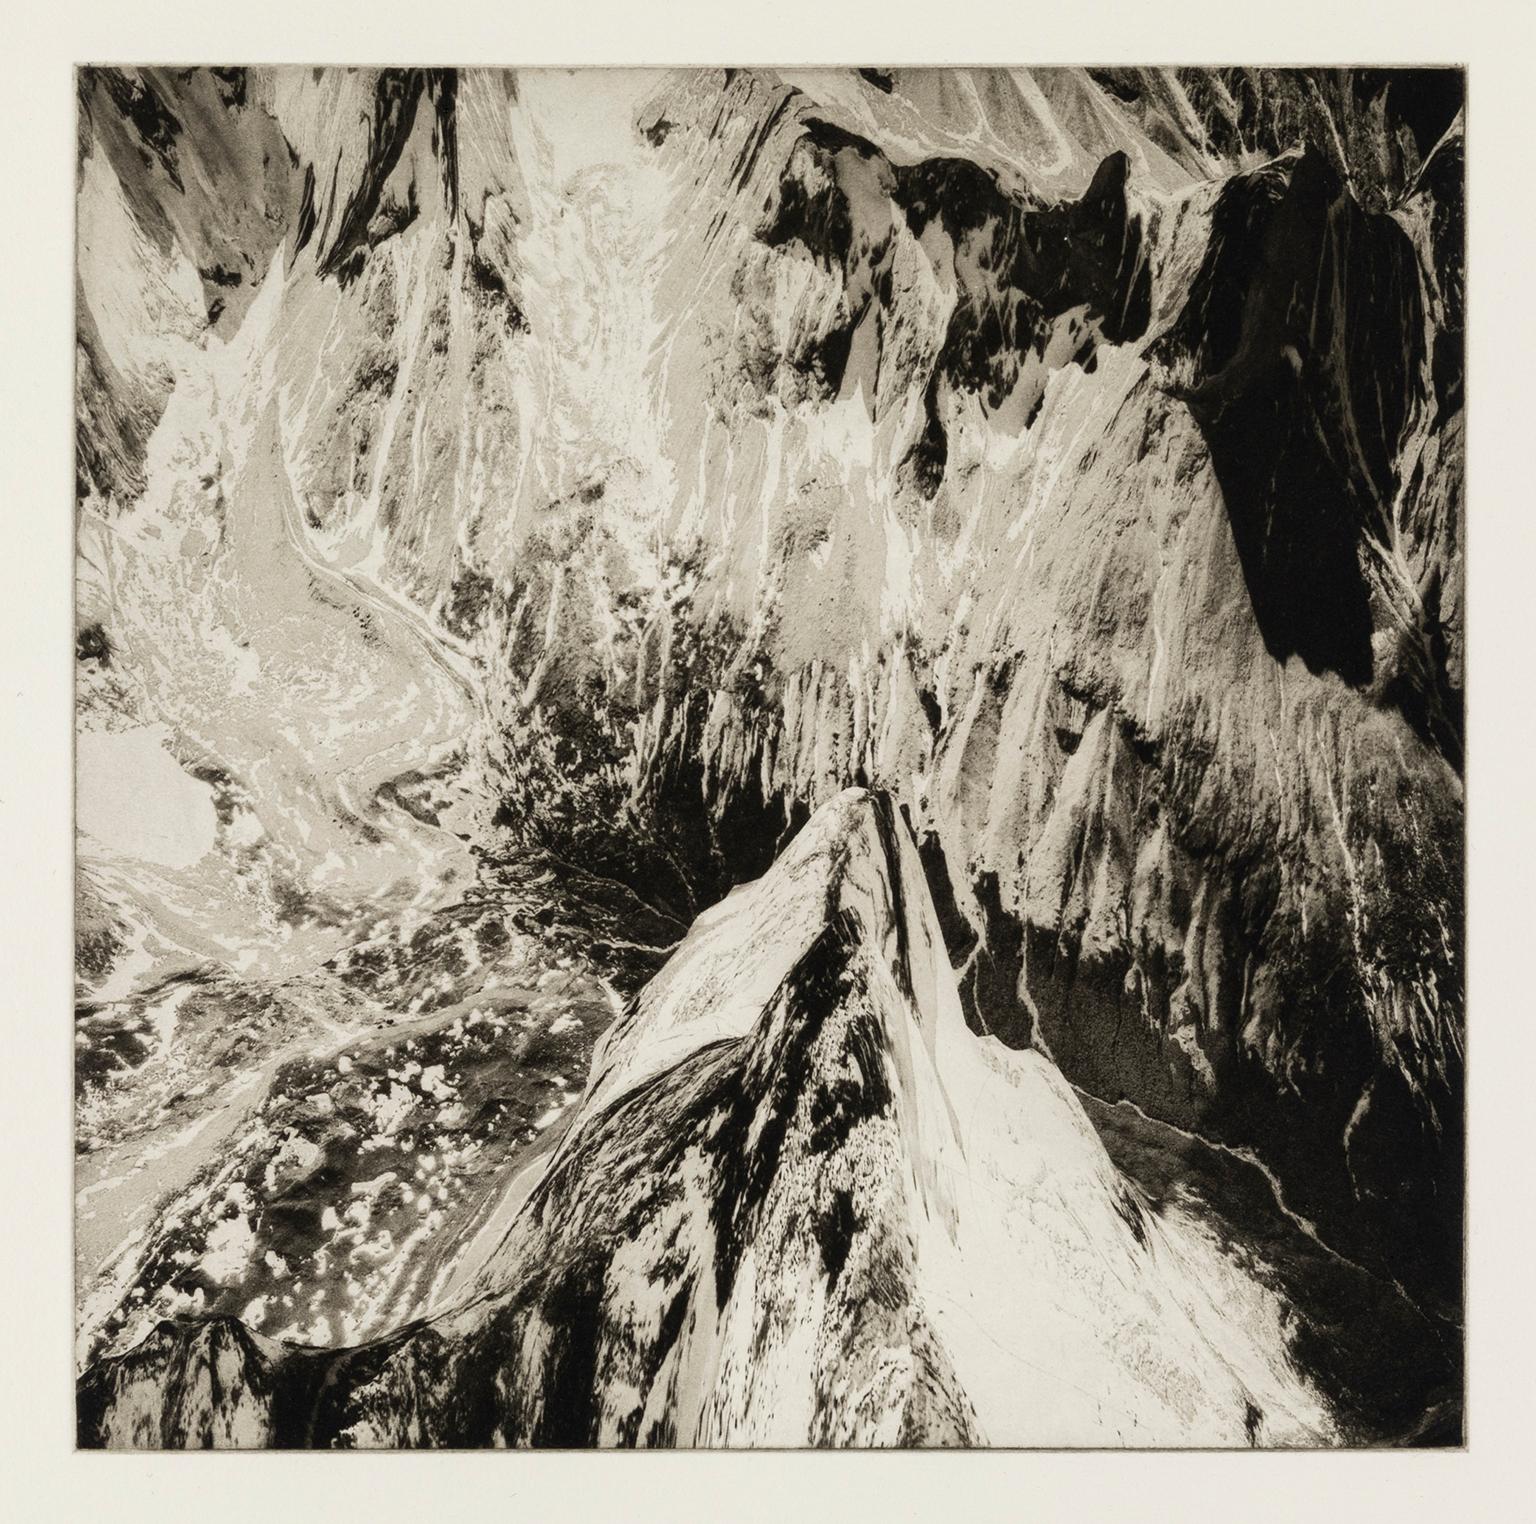 'Cerro Paine Grande, Chile' — from the series 'Axis Mundi', Contemporary - Print by Beth Ganz